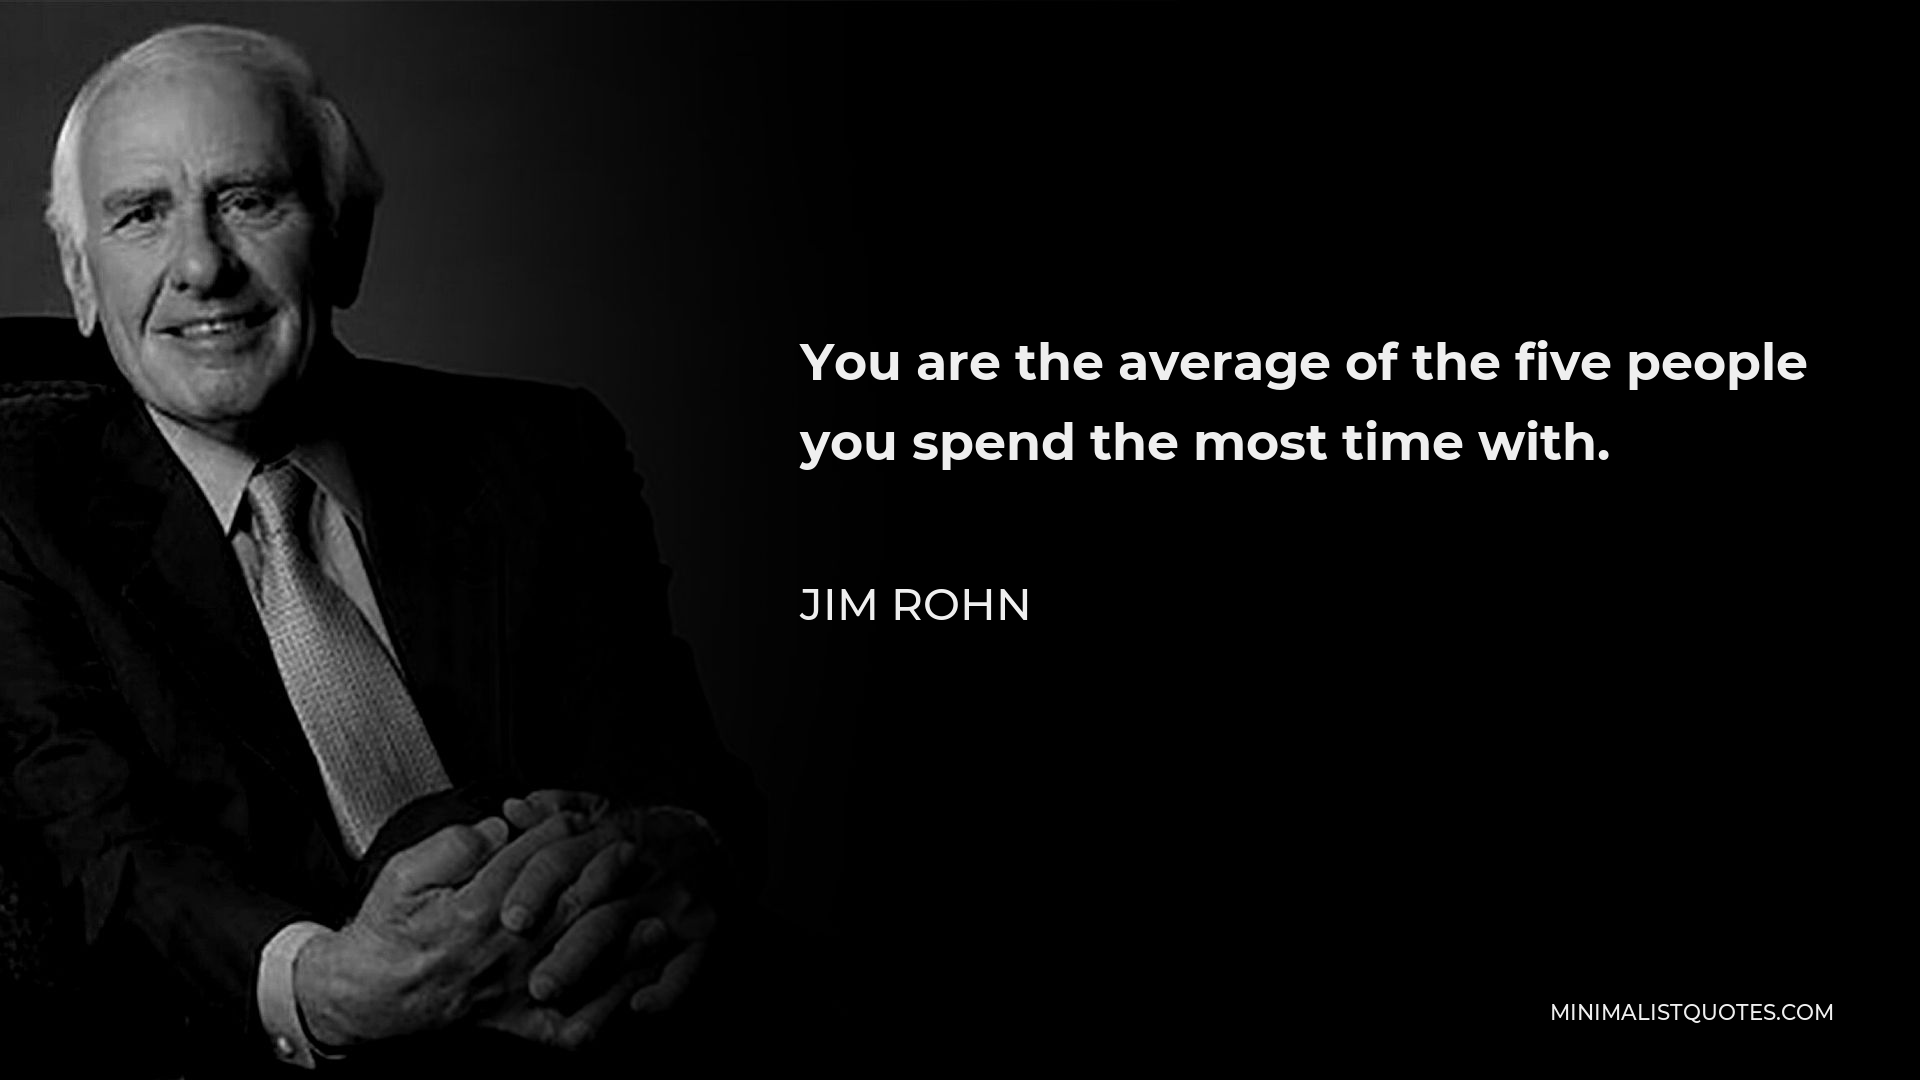 Jim Rohn Quote - You are the average of the five people you spend the most time with.